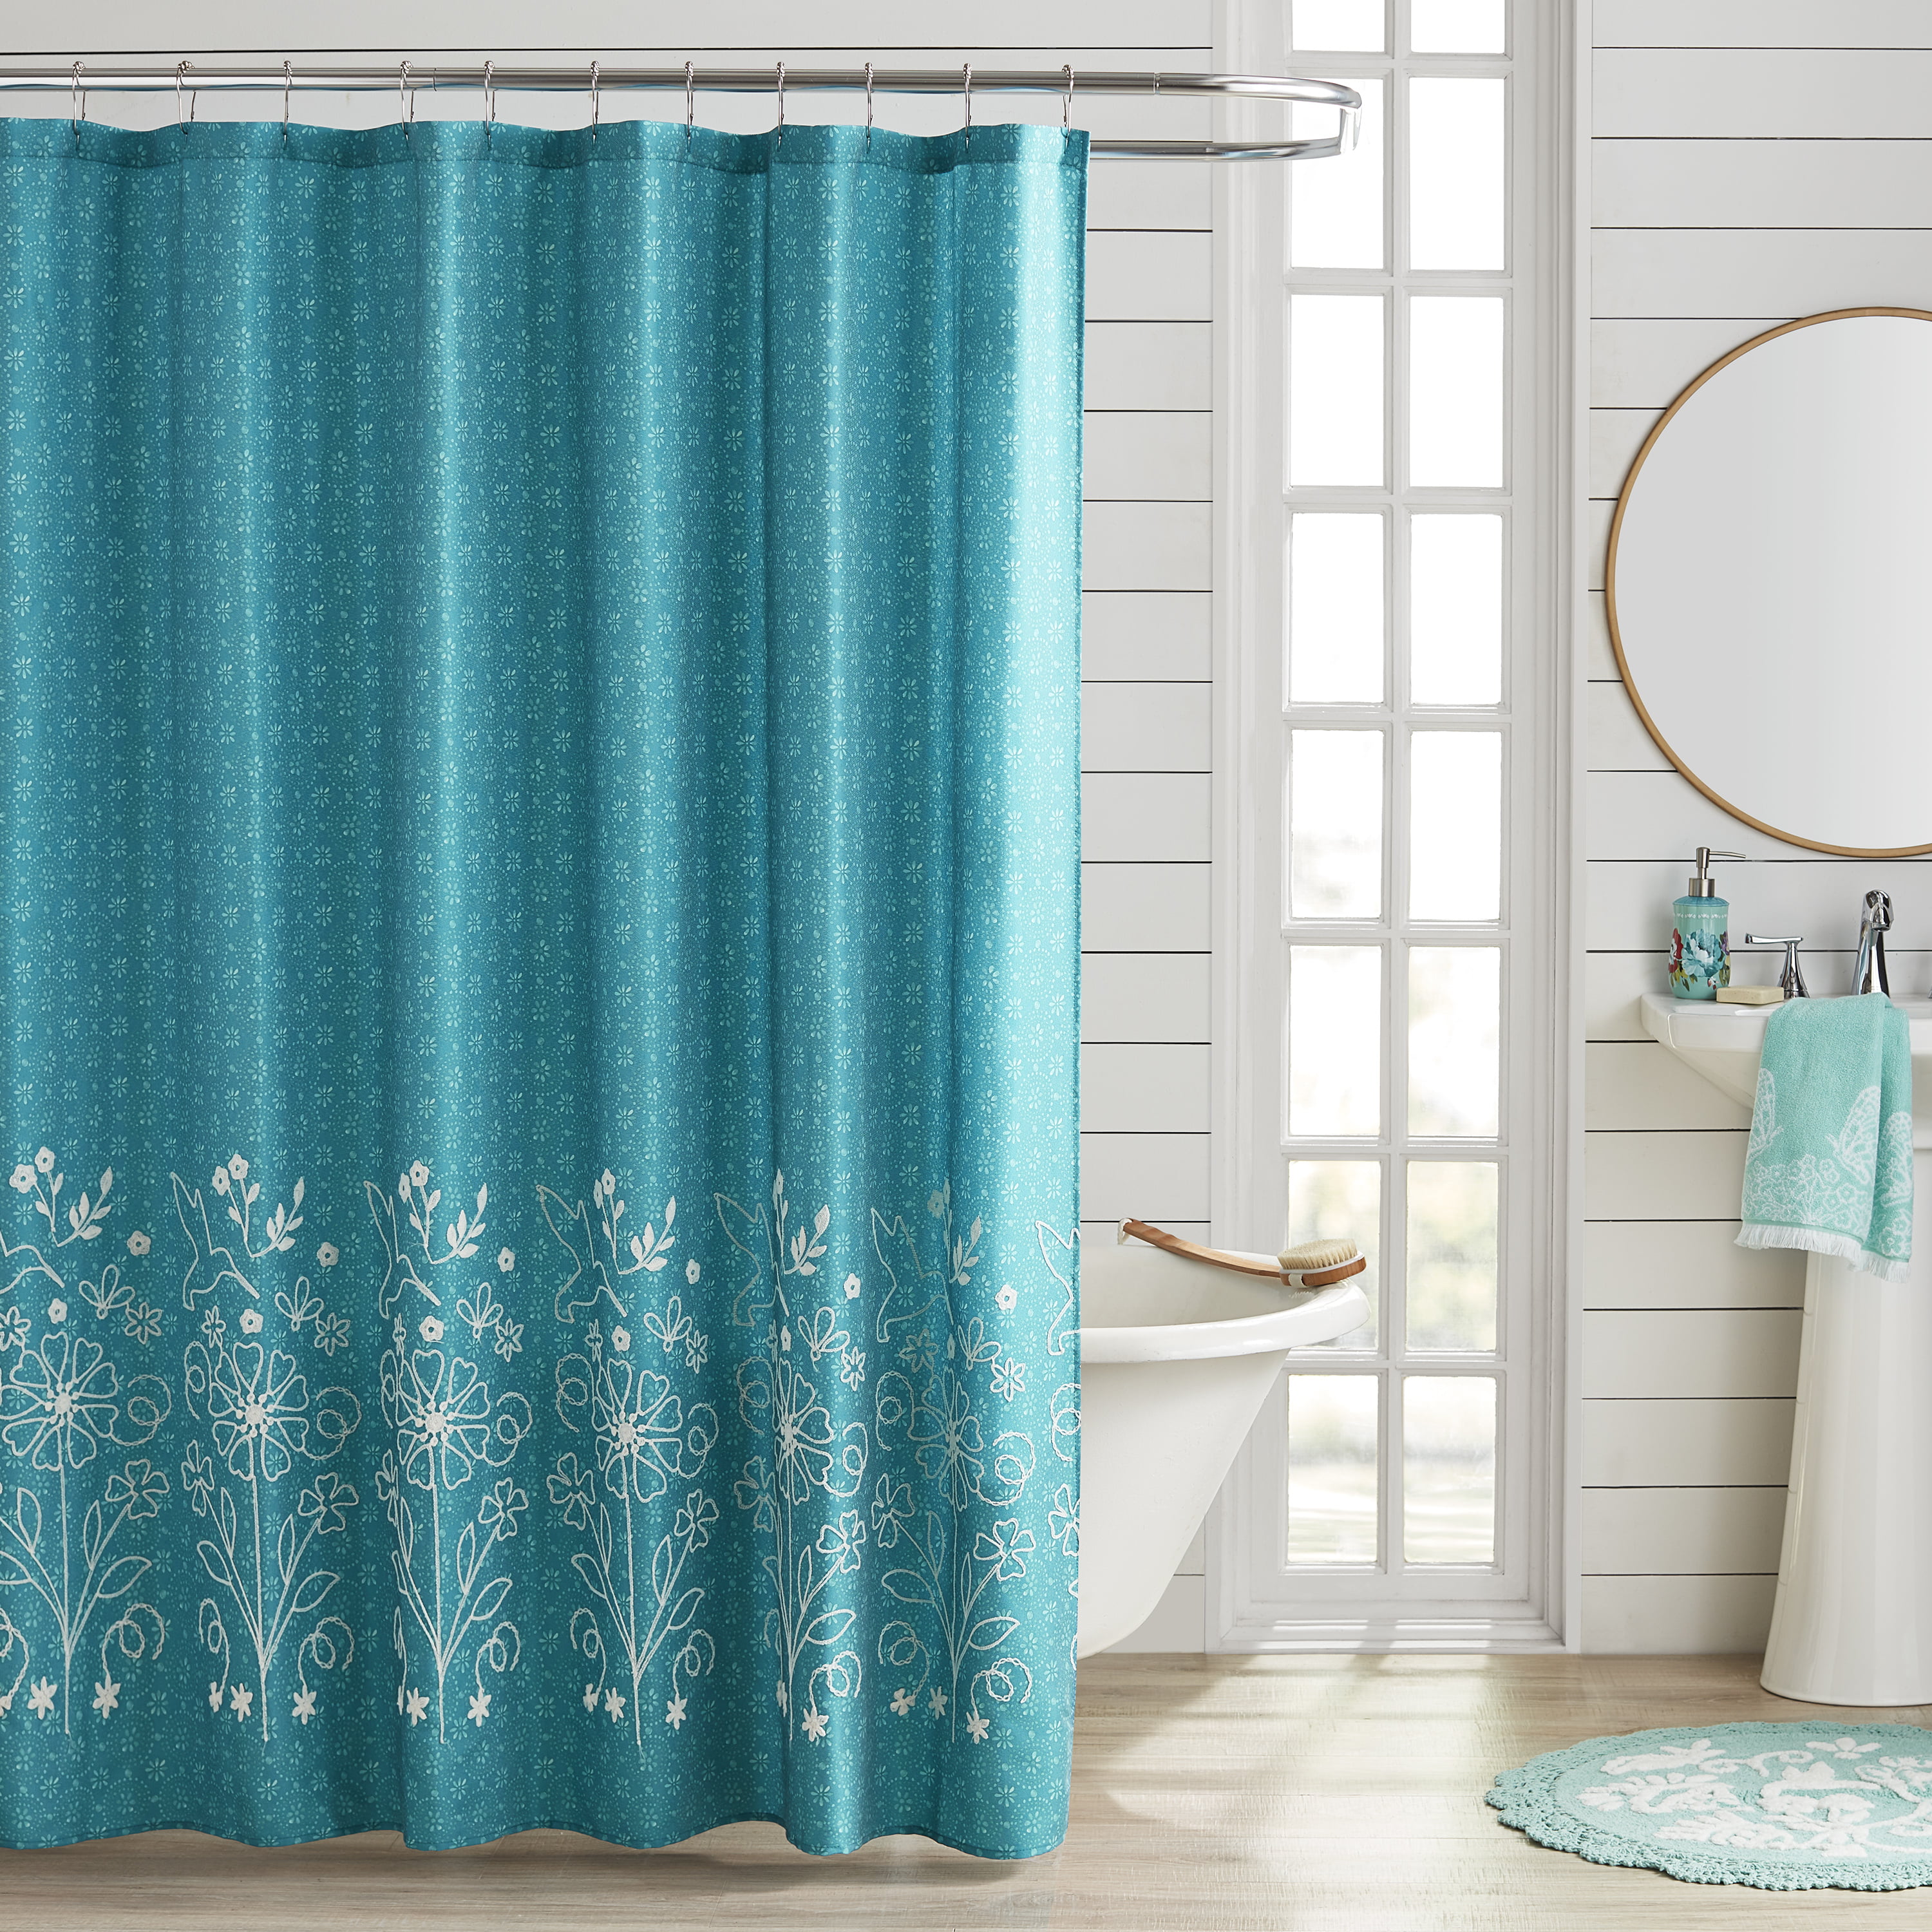 Bathroom Polyester Turquoise Wooden Door Fabric Bath Shower Curtain Home Decor 